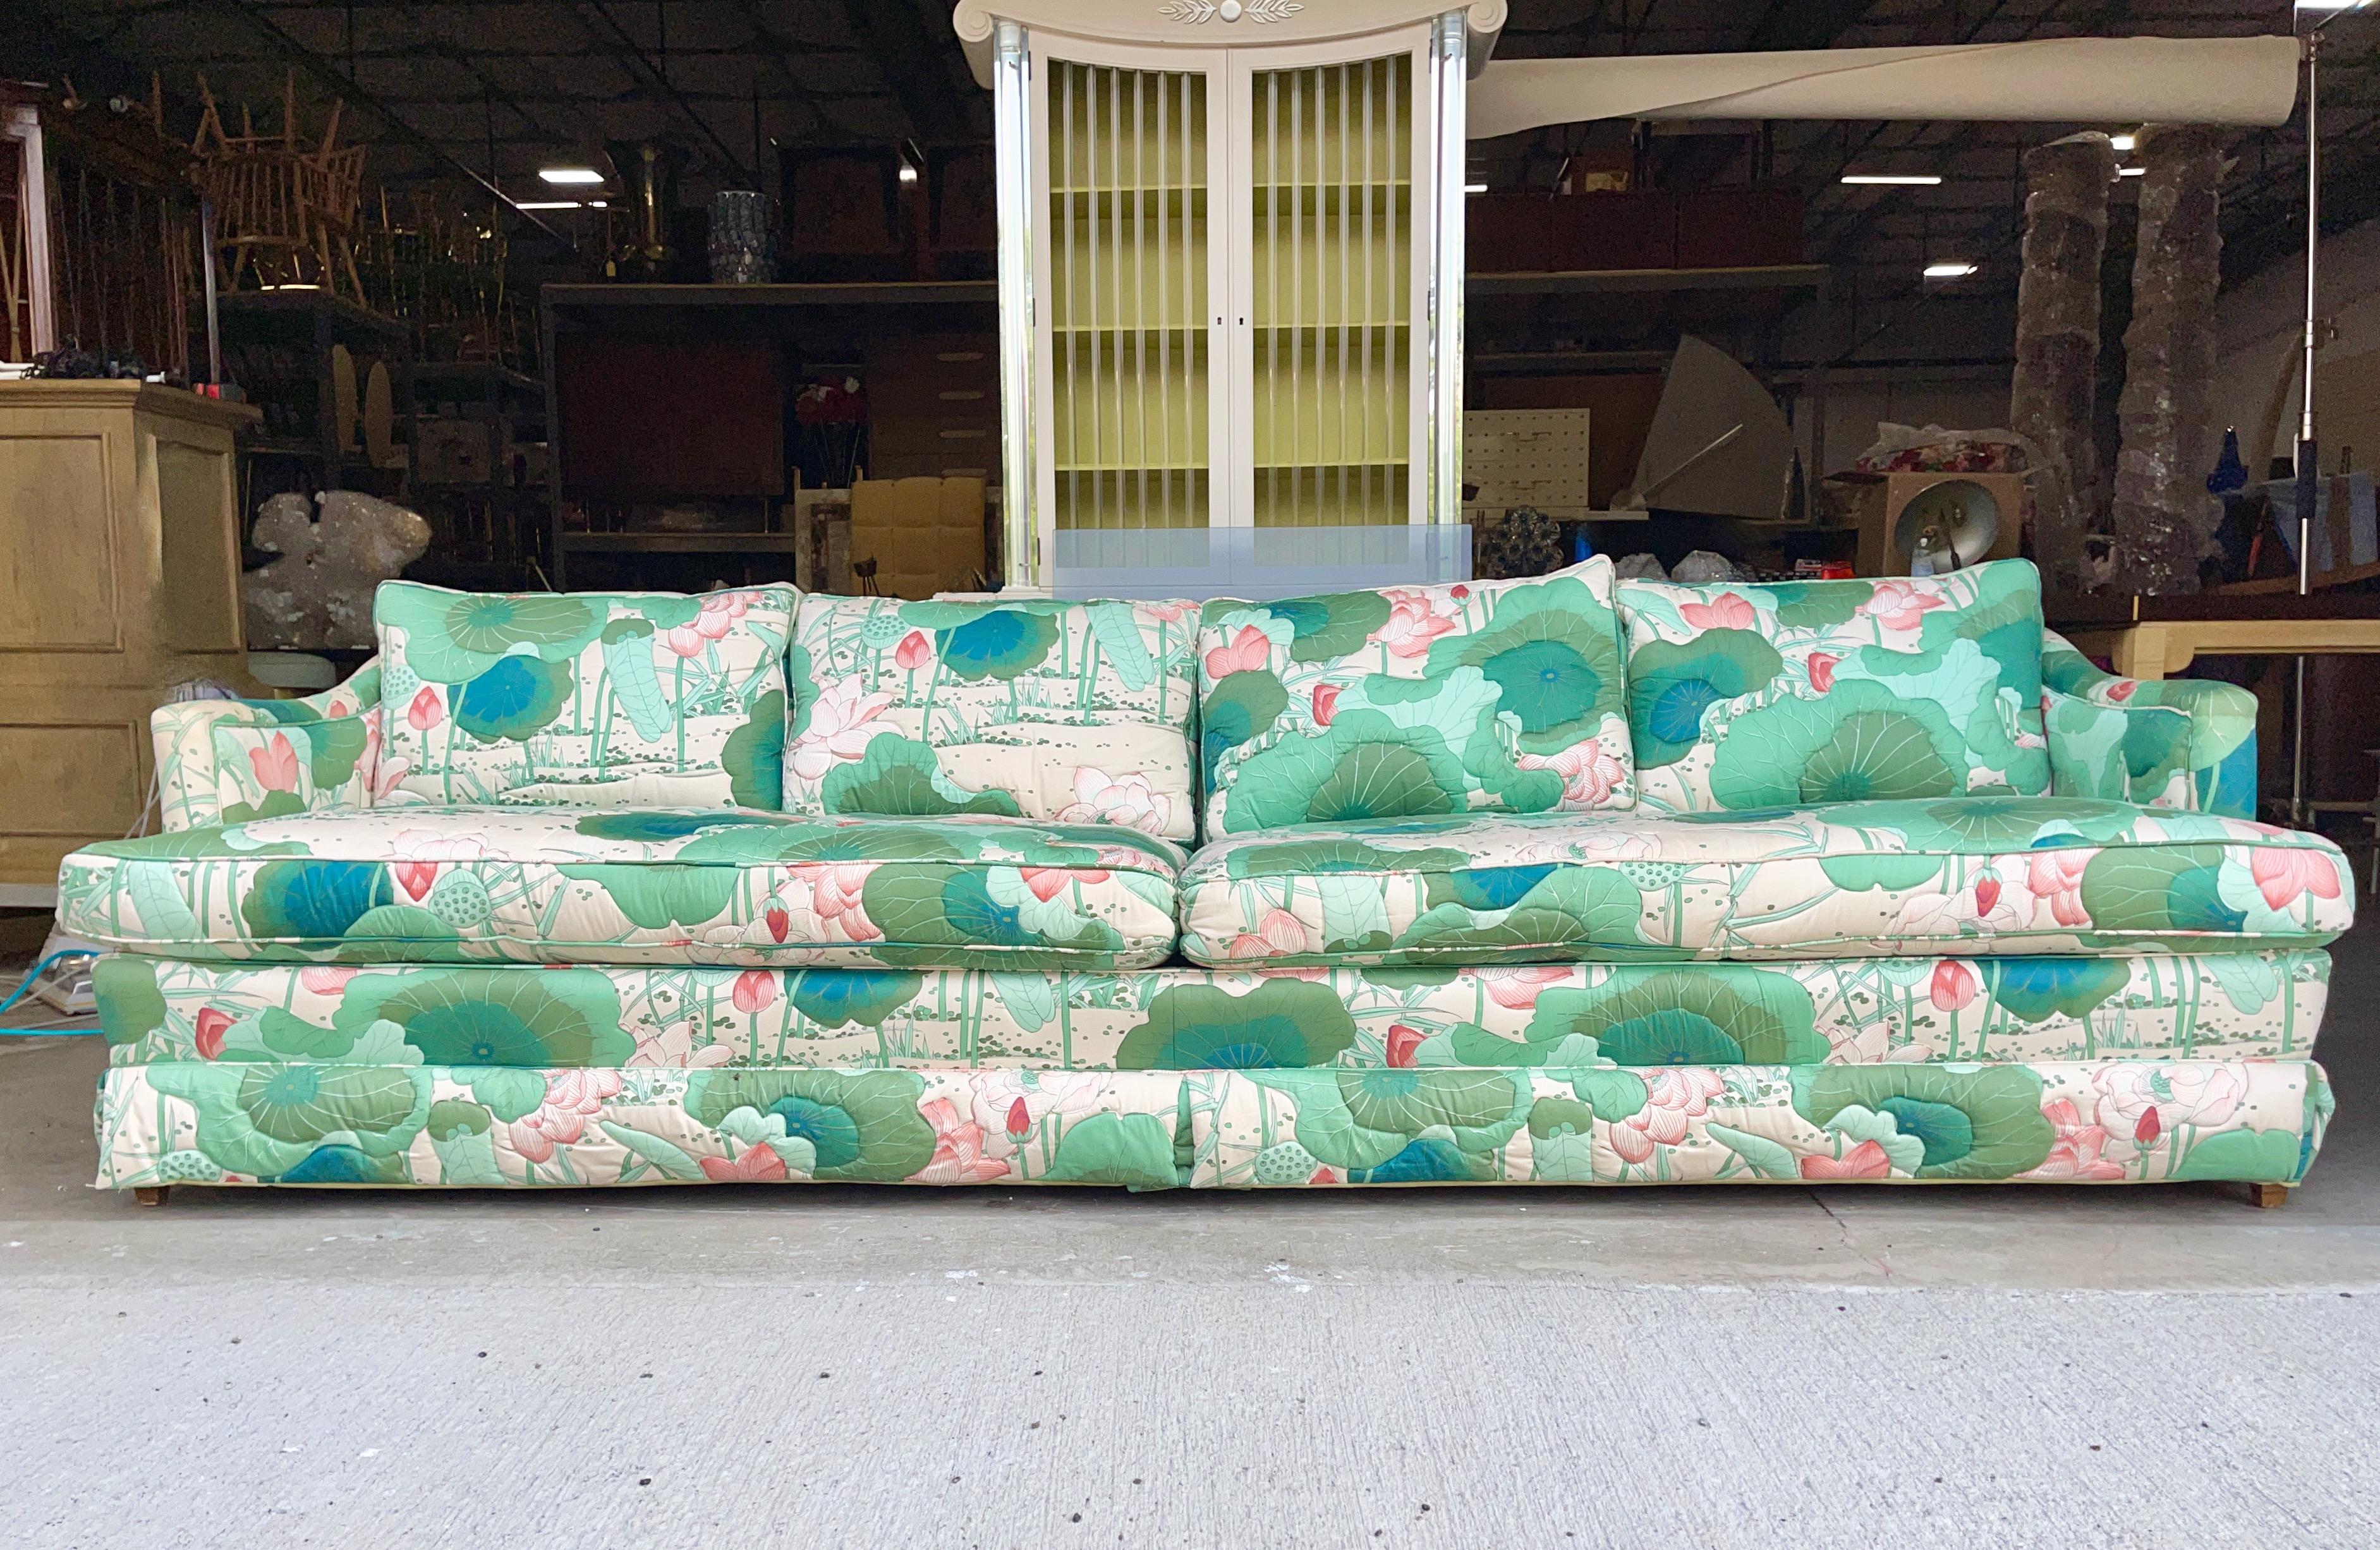 Vintage quilted cotton lily pad upholstered sofa with two seat cushions, four back cushions and four throw pillows.
No labels.
Arm height 23